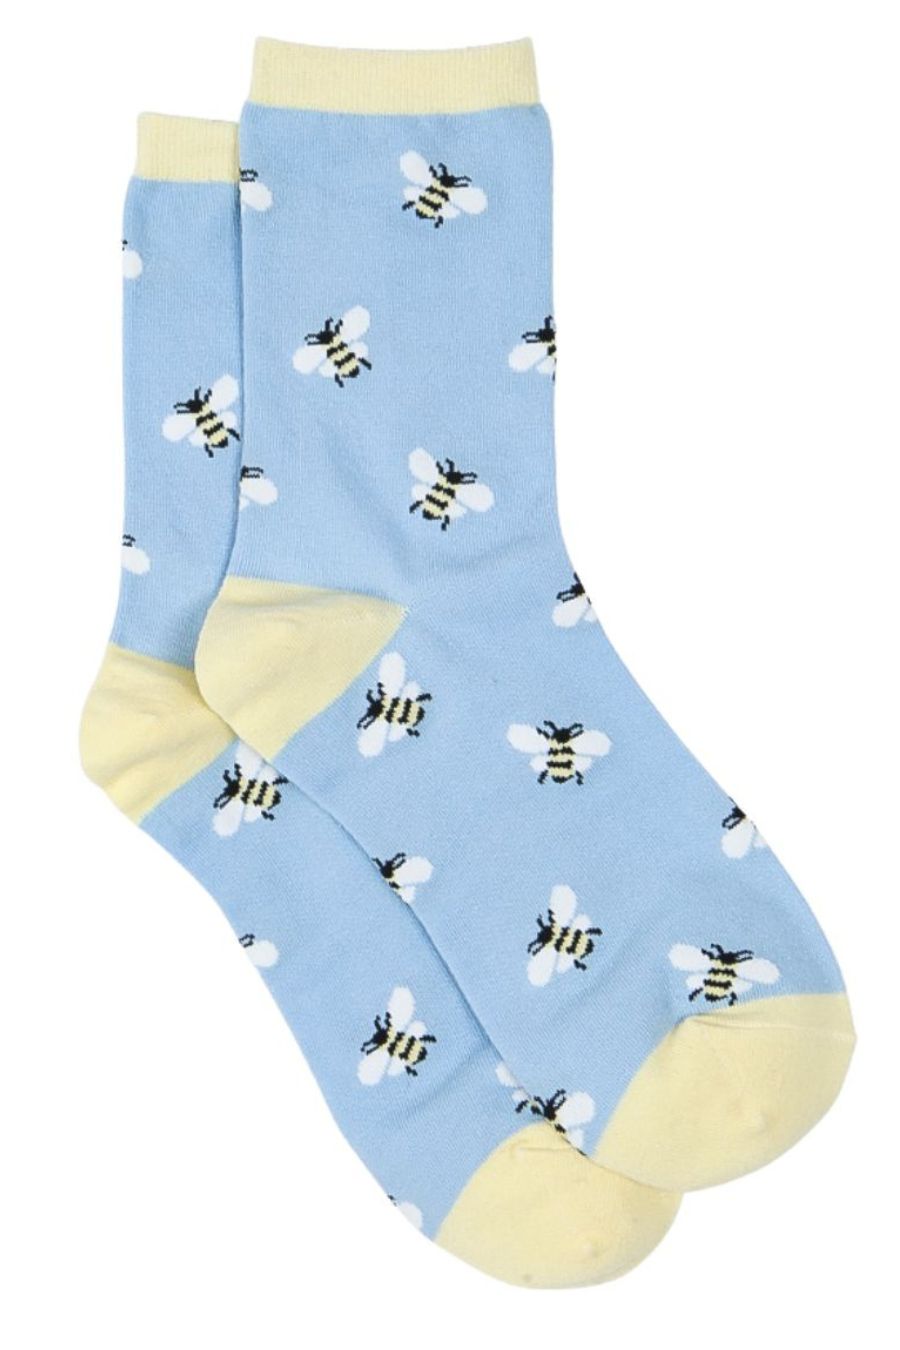 blue, yellow ankle socks with an all over bee print